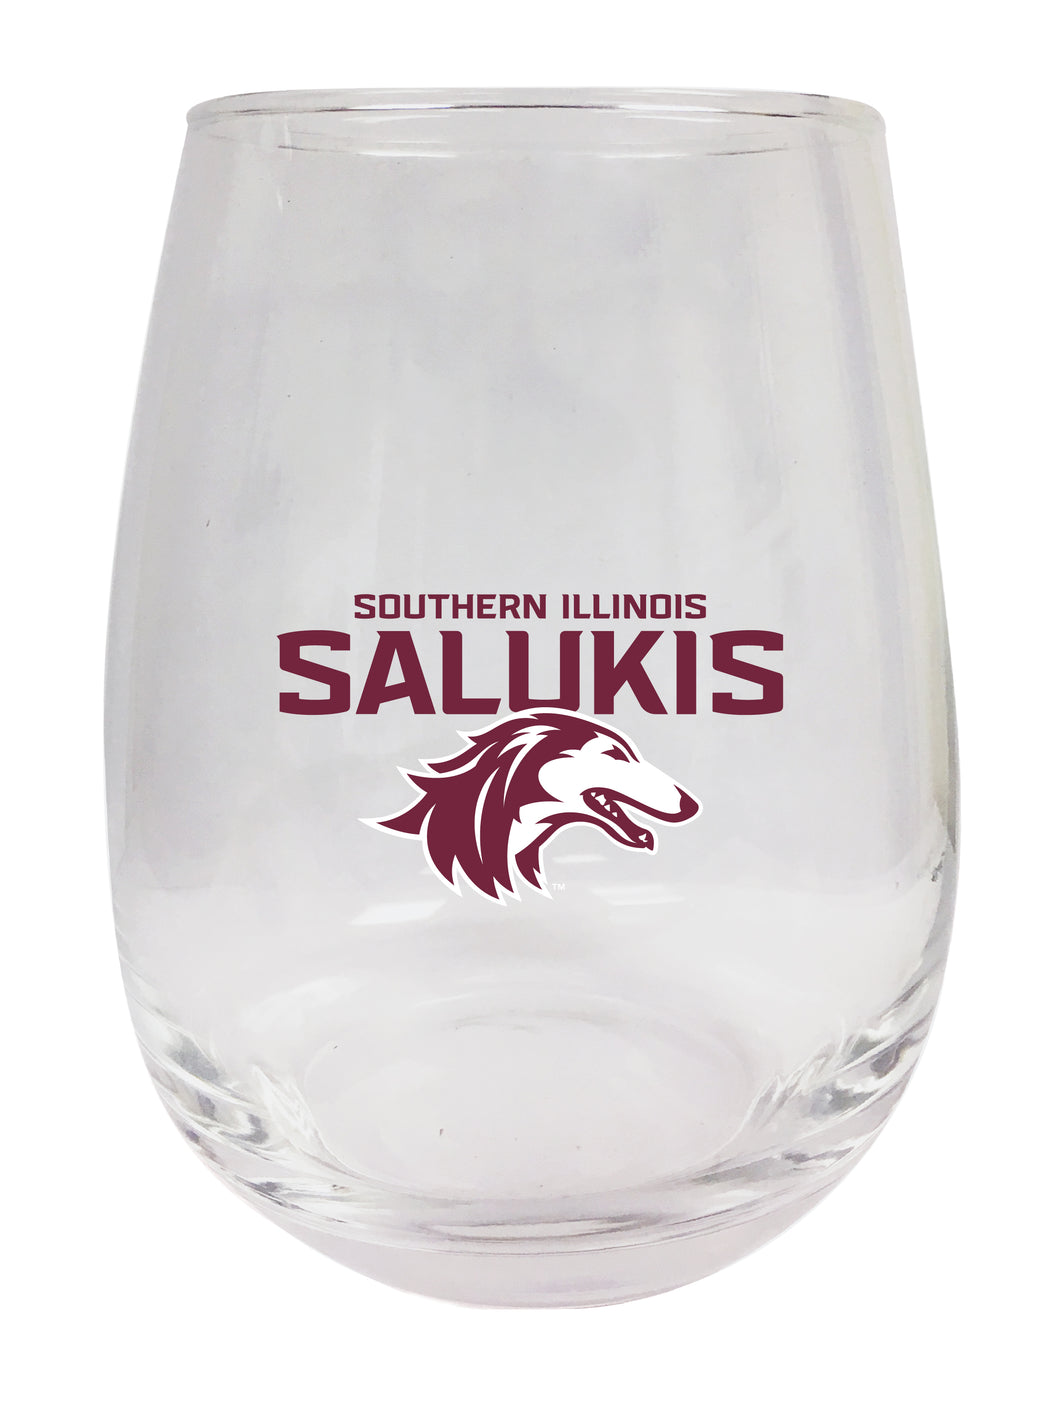 Southern Illinois Salukis Stemless Wine Glass - 9 oz. | Officially Licensed NCAA Merchandise